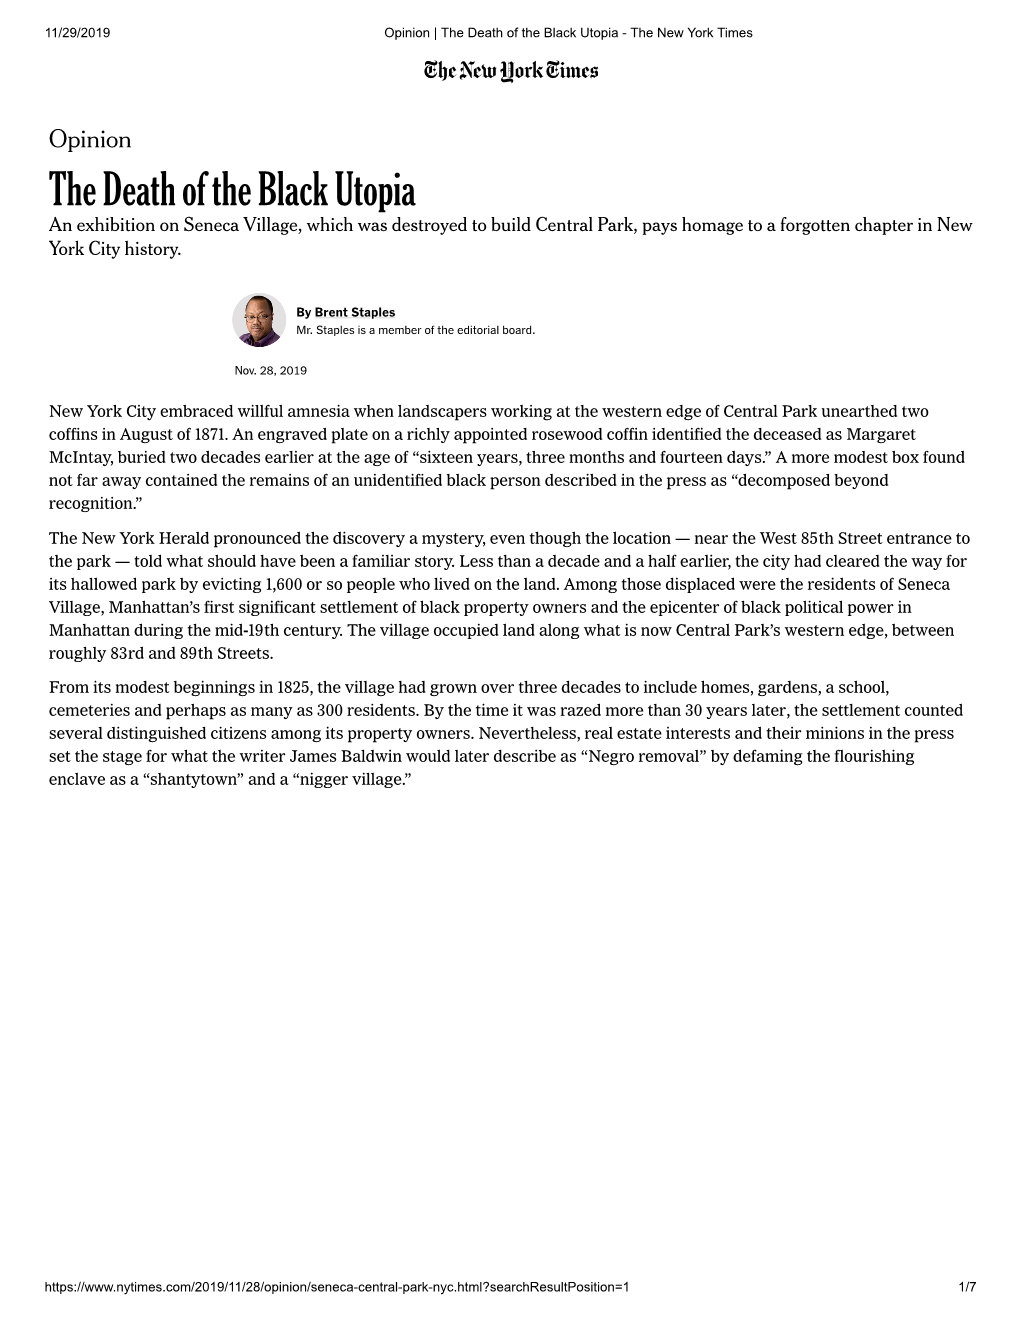 The Death of the Black Utopia - the New York Times